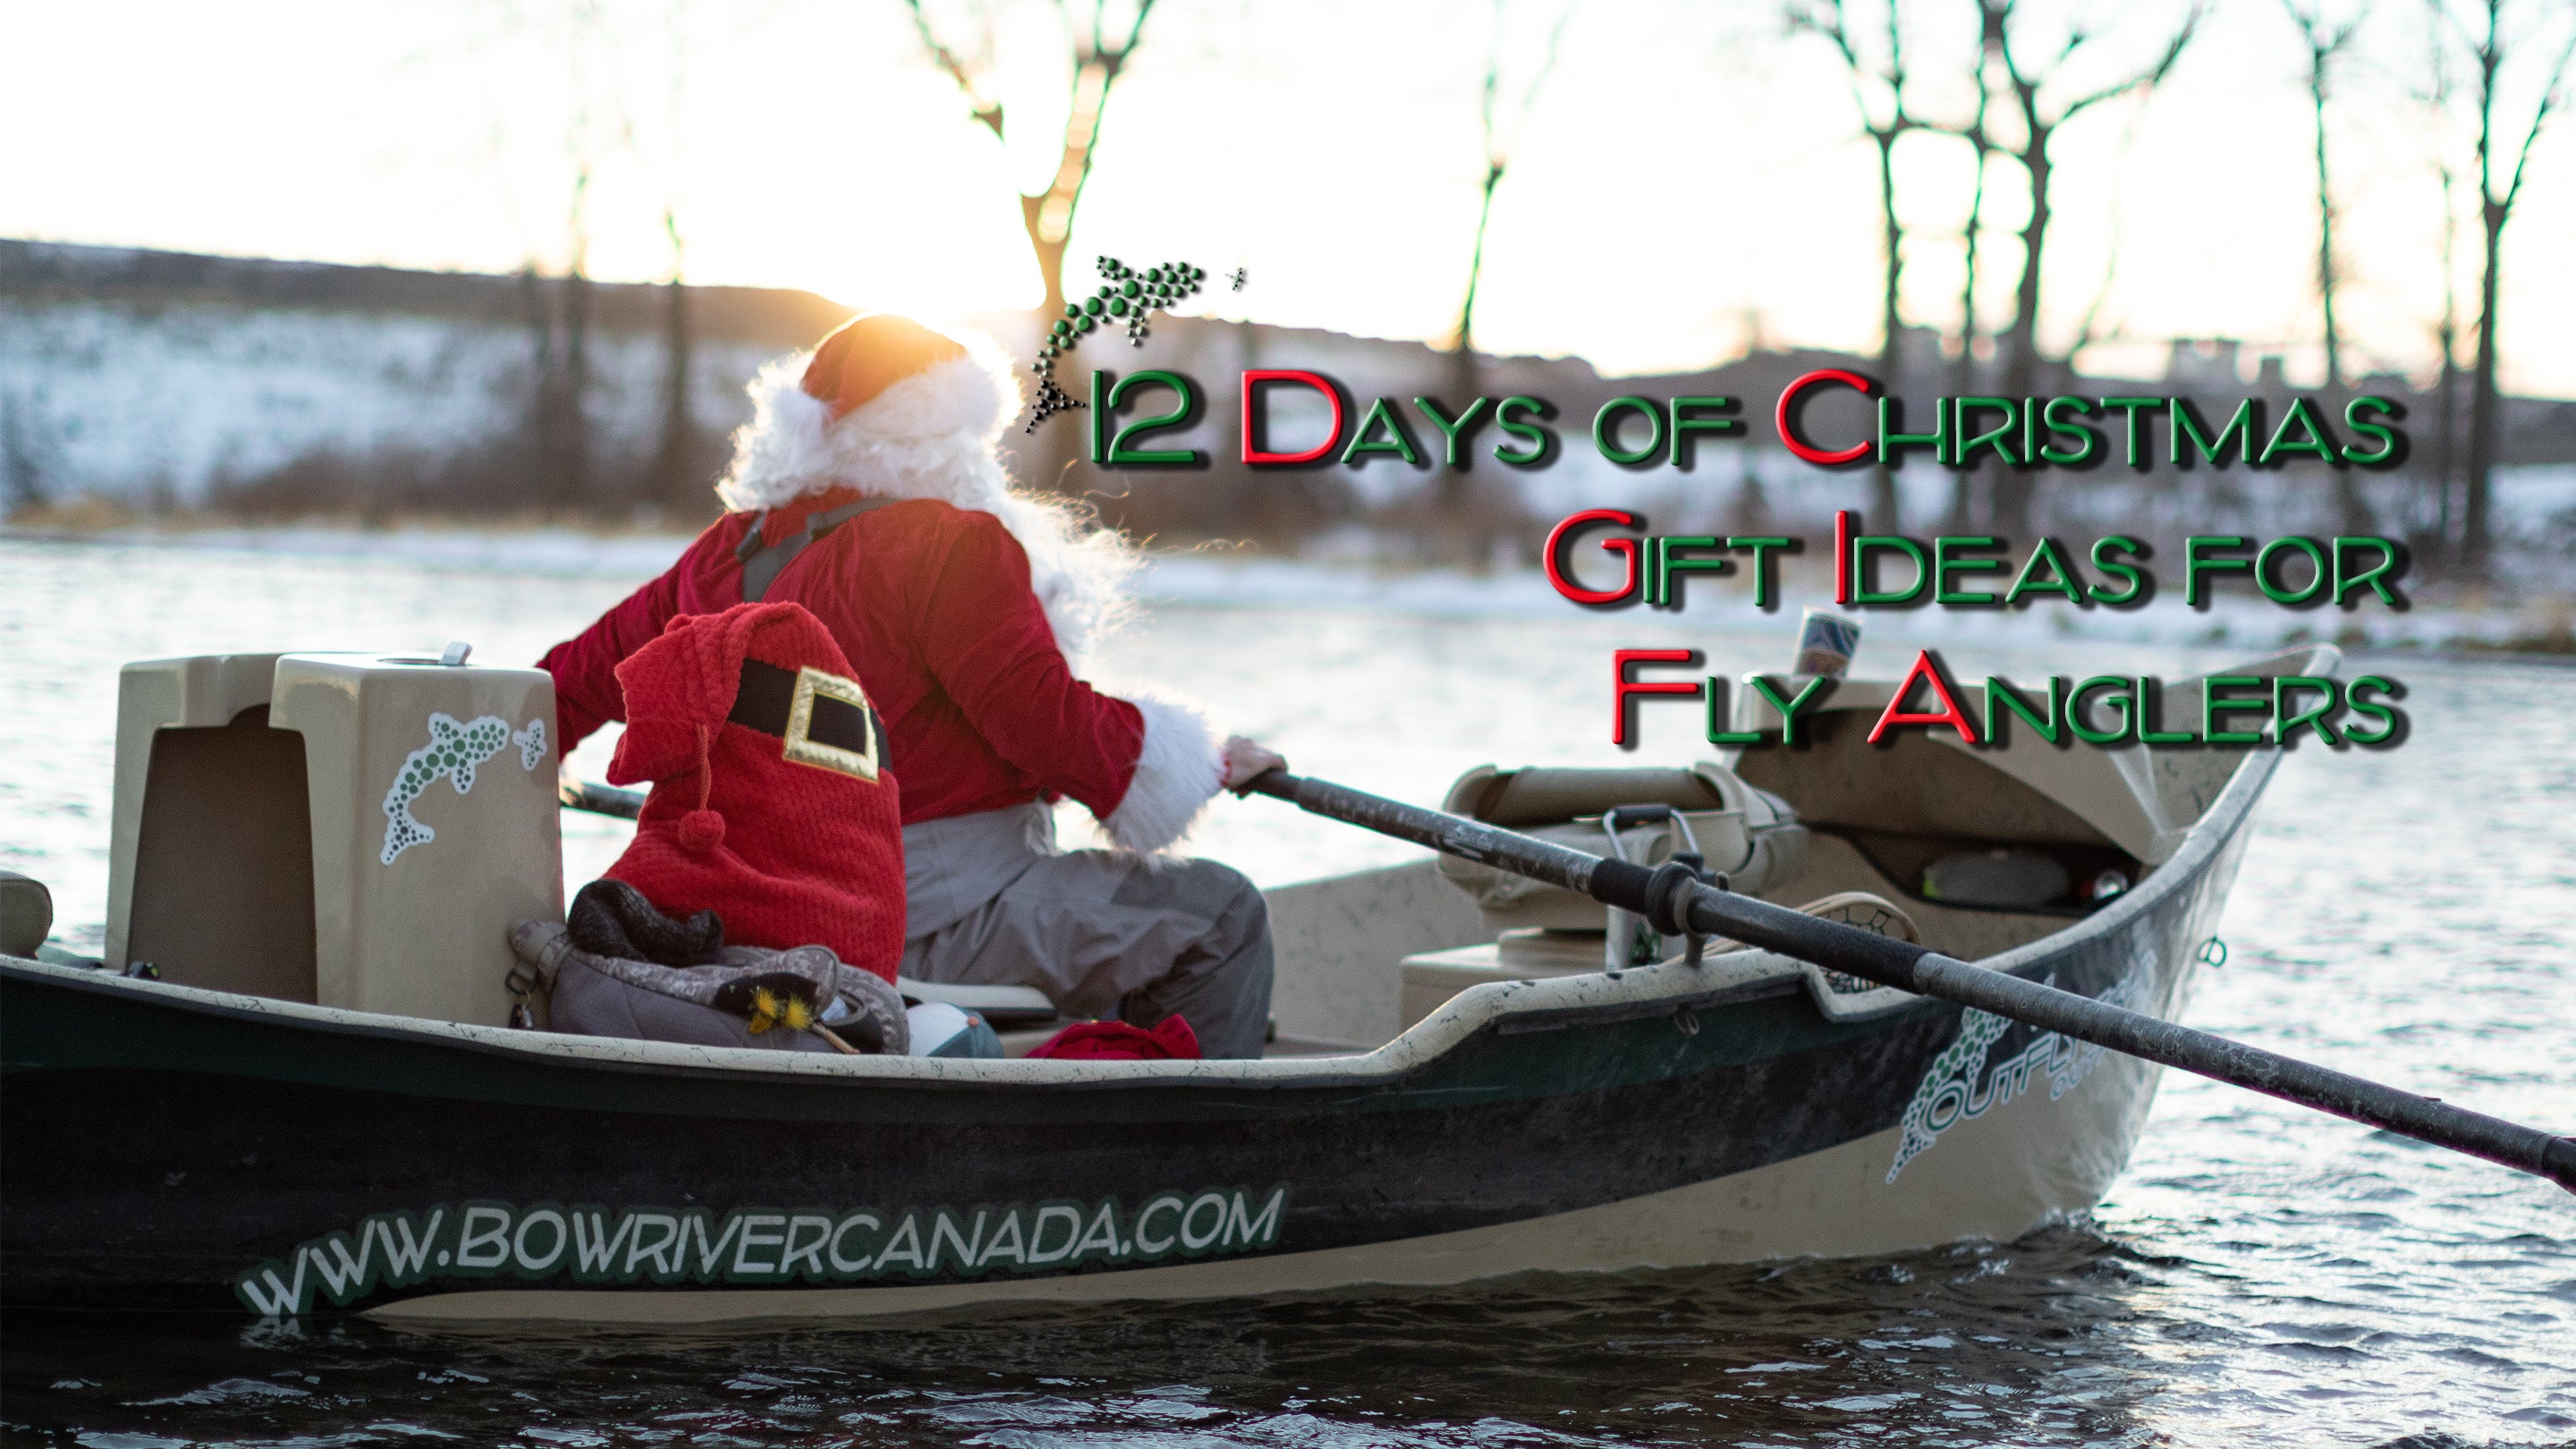 12 Days of Christmas Gift Ideas for Fly Anglers 2023